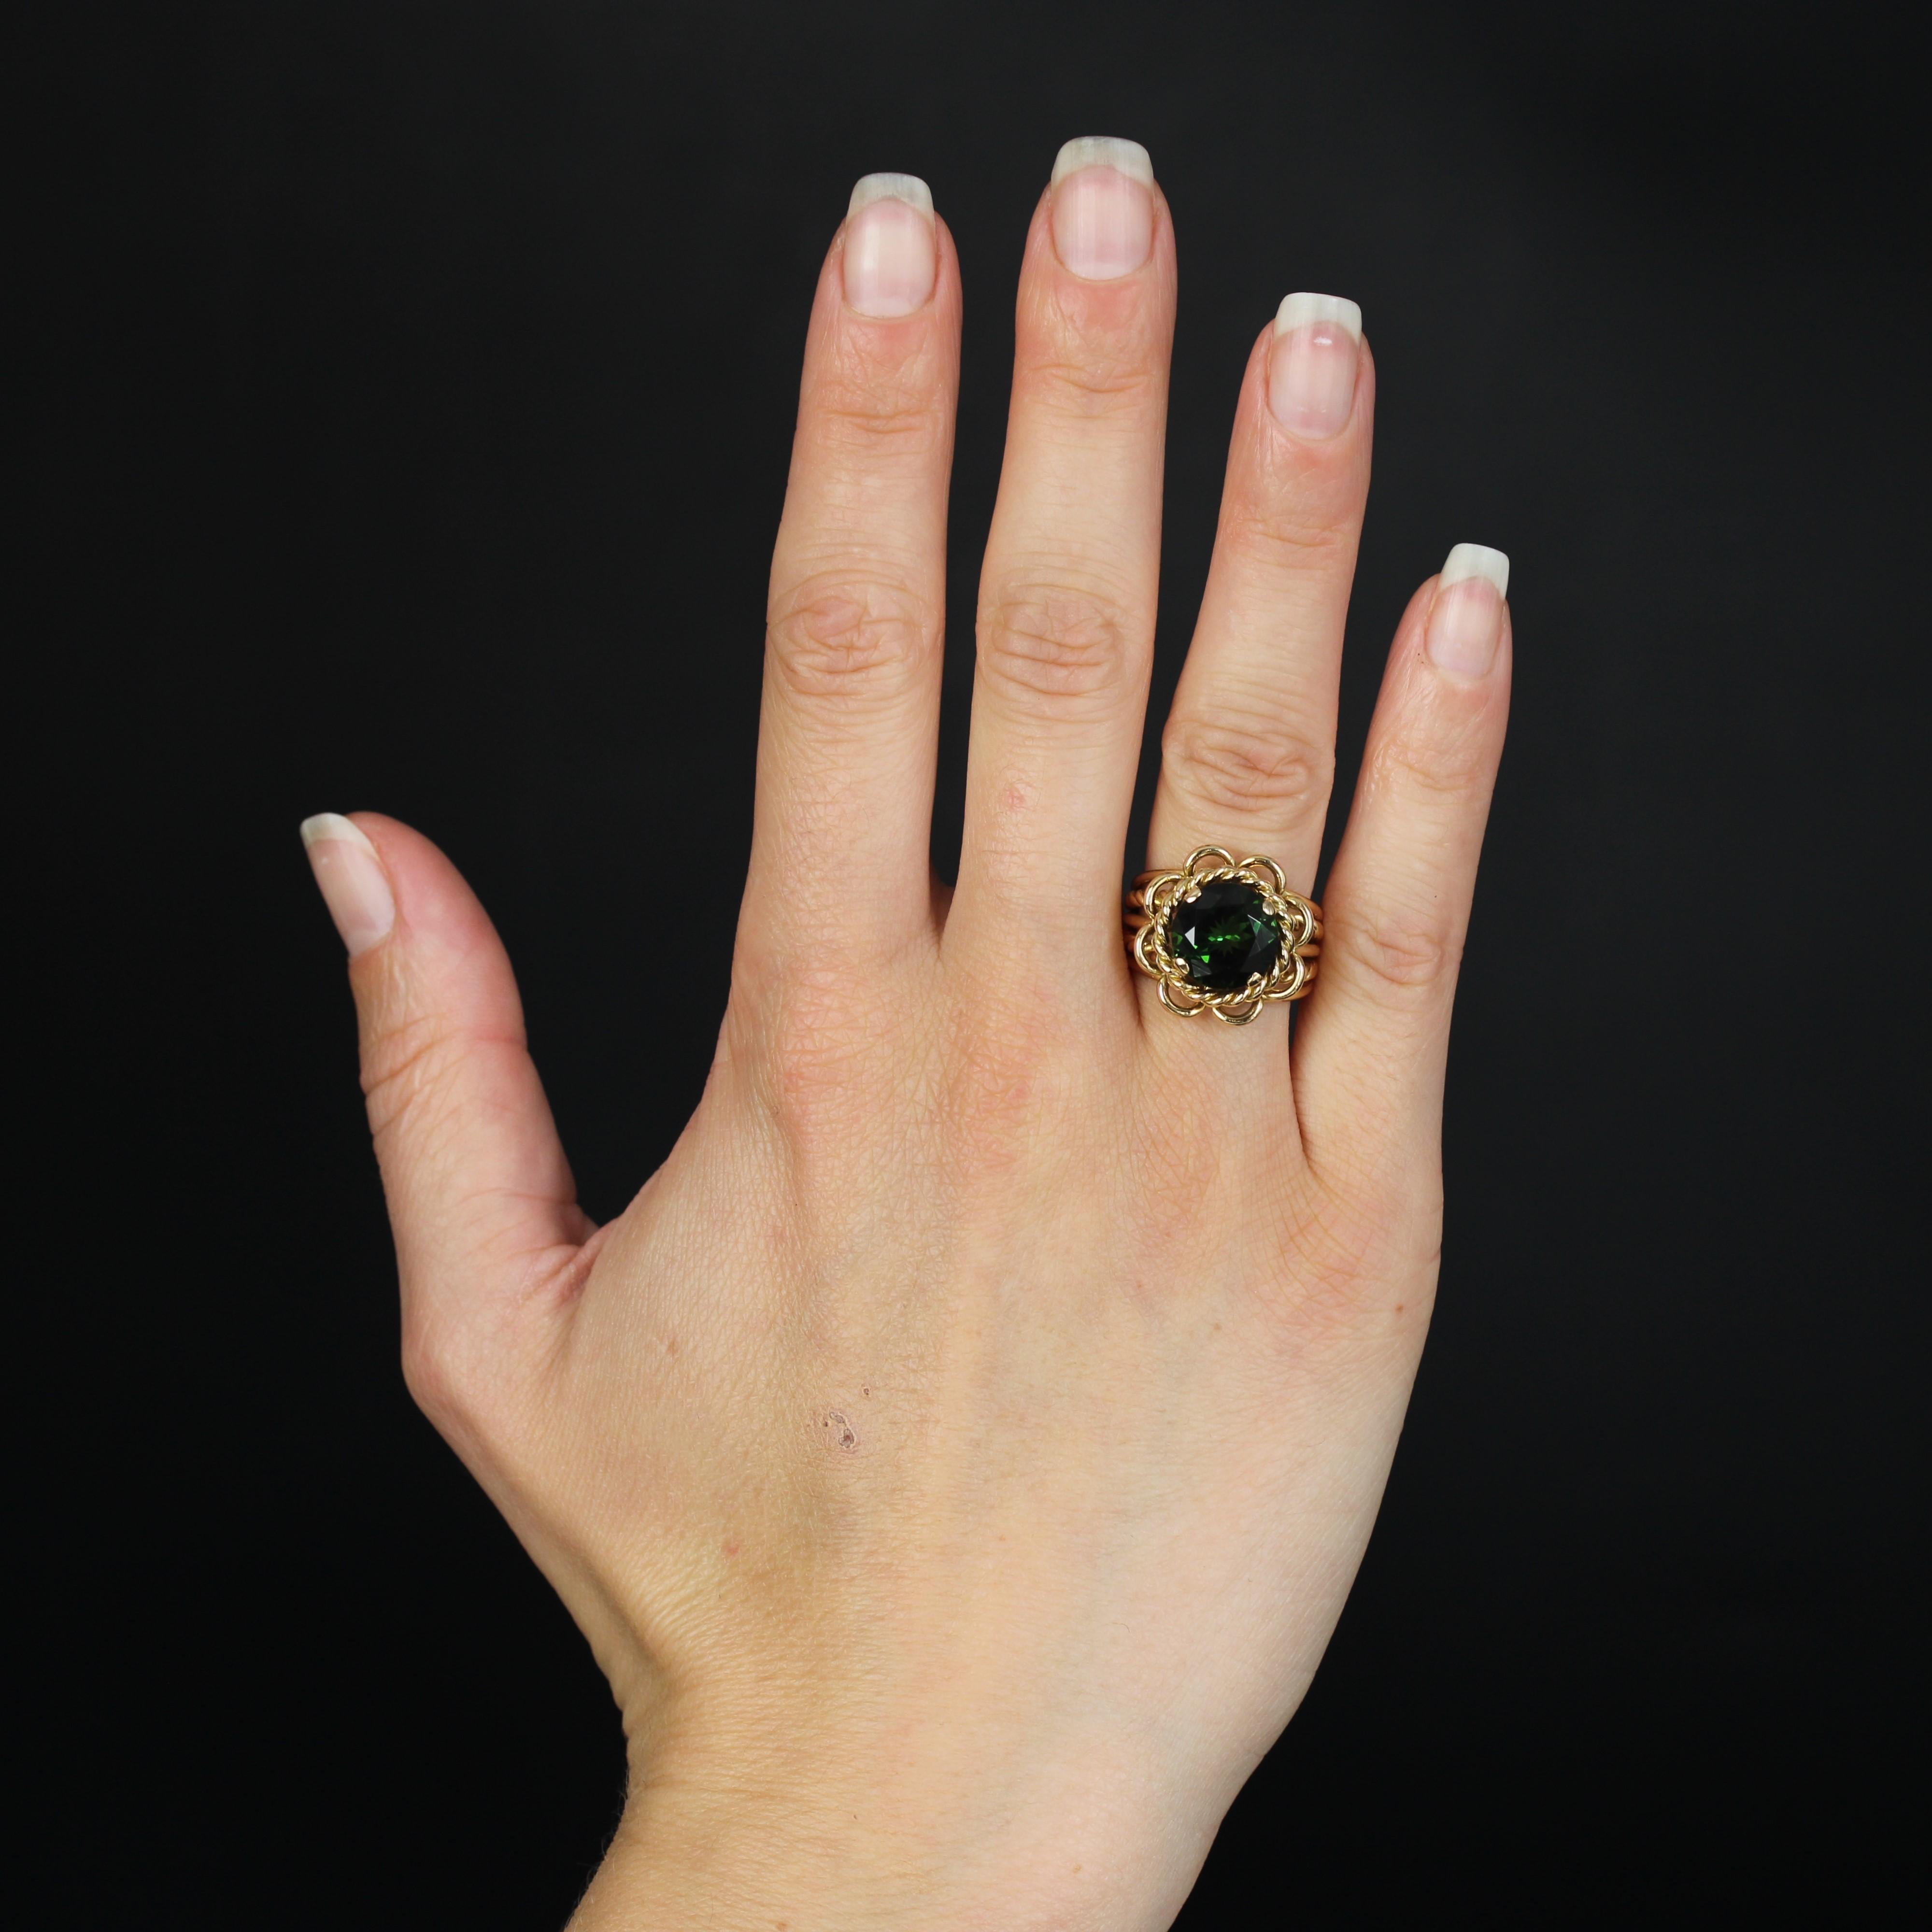 Ring in 18 karat yellow gold.
The original setting of this vintage ring is made of gold wire and gold cords that form the band and the basket that supports a large round faceted green tourmaline held in place by 4 claws.
Total weight of the